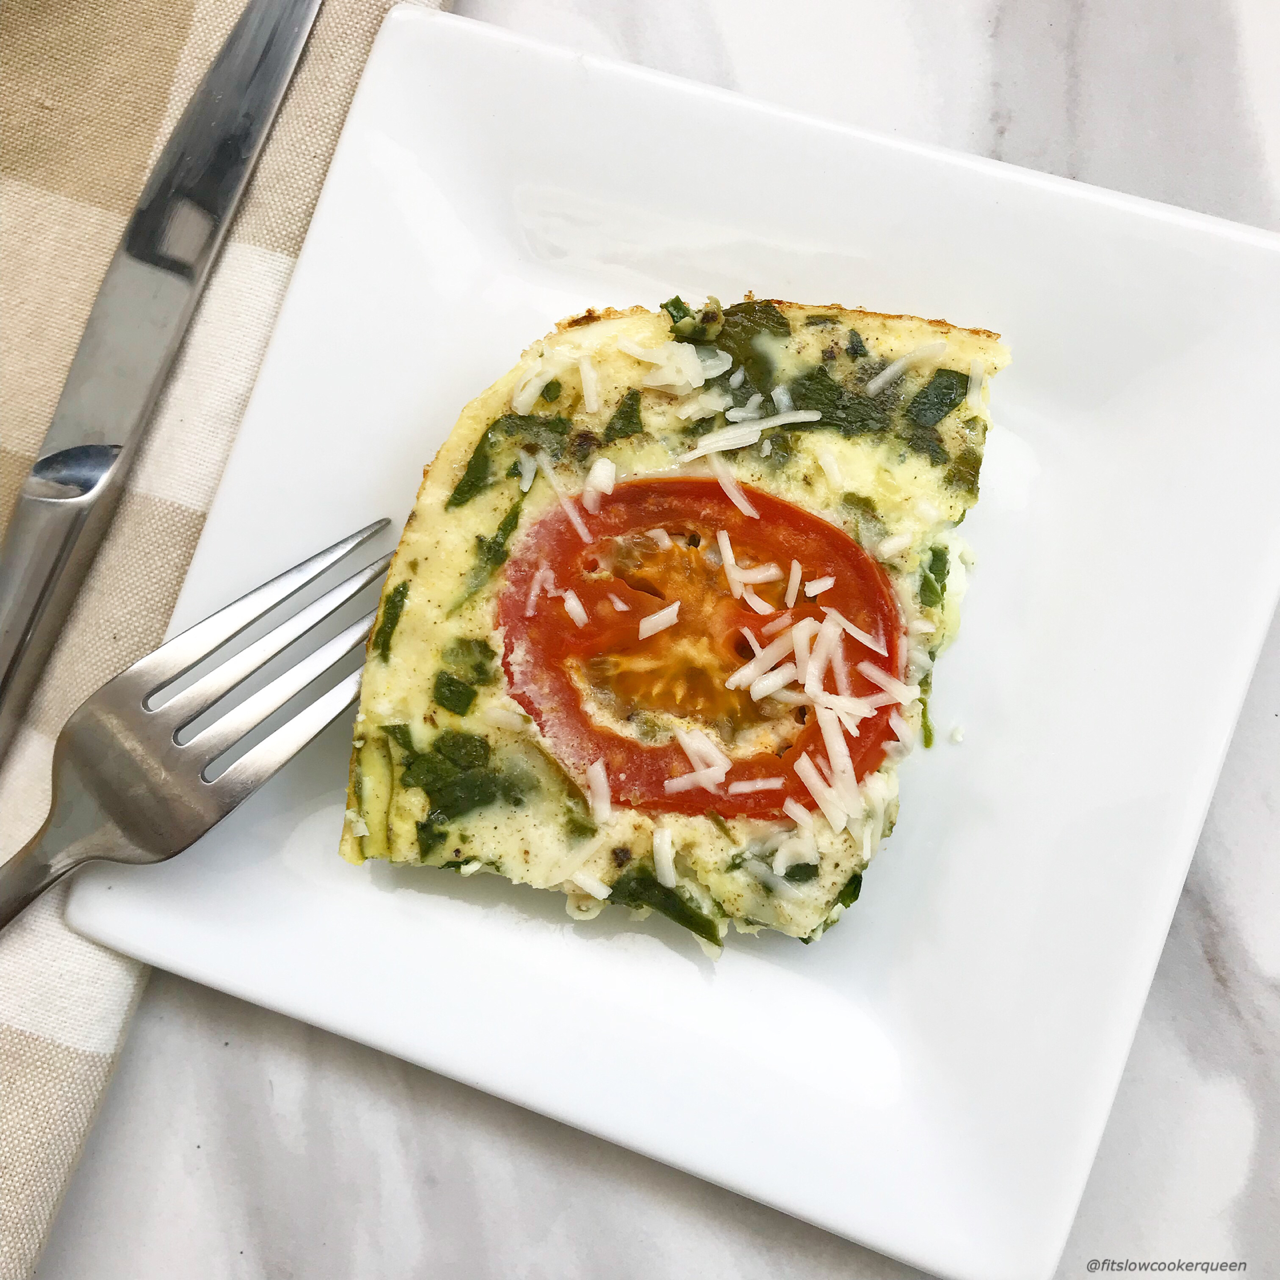 An egg white frittata is a great low-sodium, low-calorie, and low-carb breakfast or brunch option. Load this frittata up with your favorite vegetables and cook it overnight in the slow cooker to wake up to an easy & healthy vegetarian breakfast.